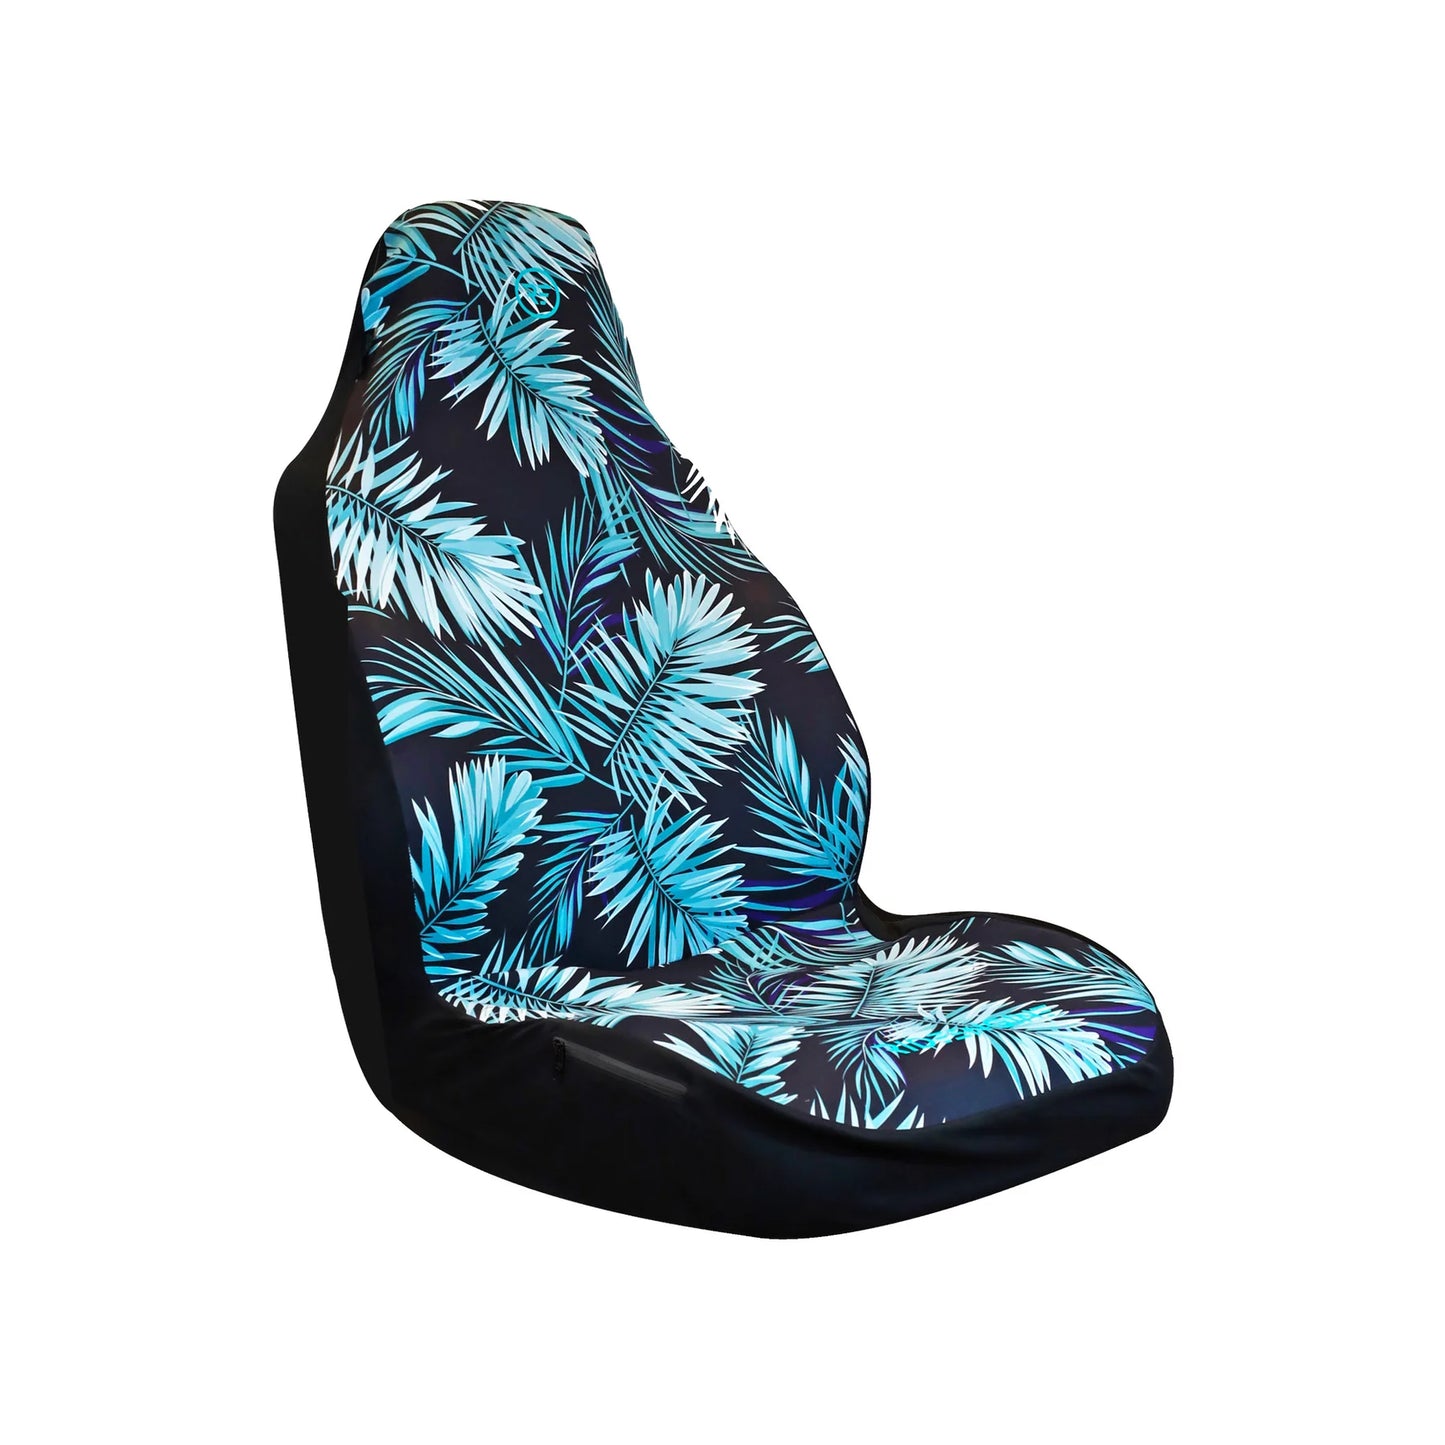 RIDE ENGINE ROAD WARRIOR SEAT COVER